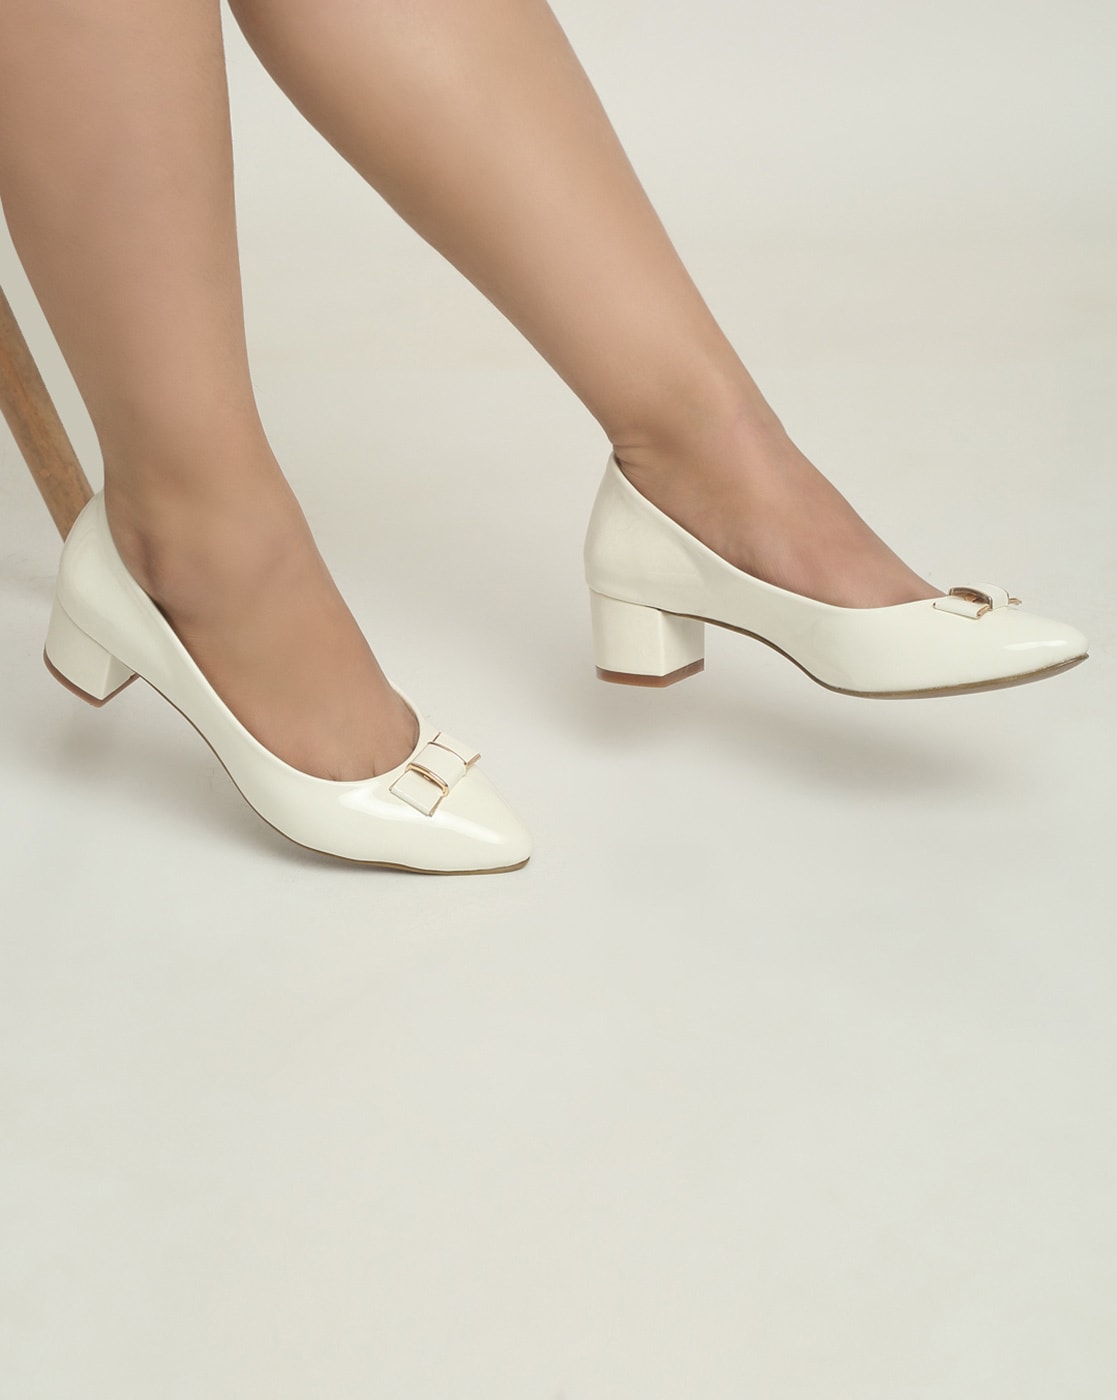 Stylestry High Heels Solid Patent White Pumps For Women